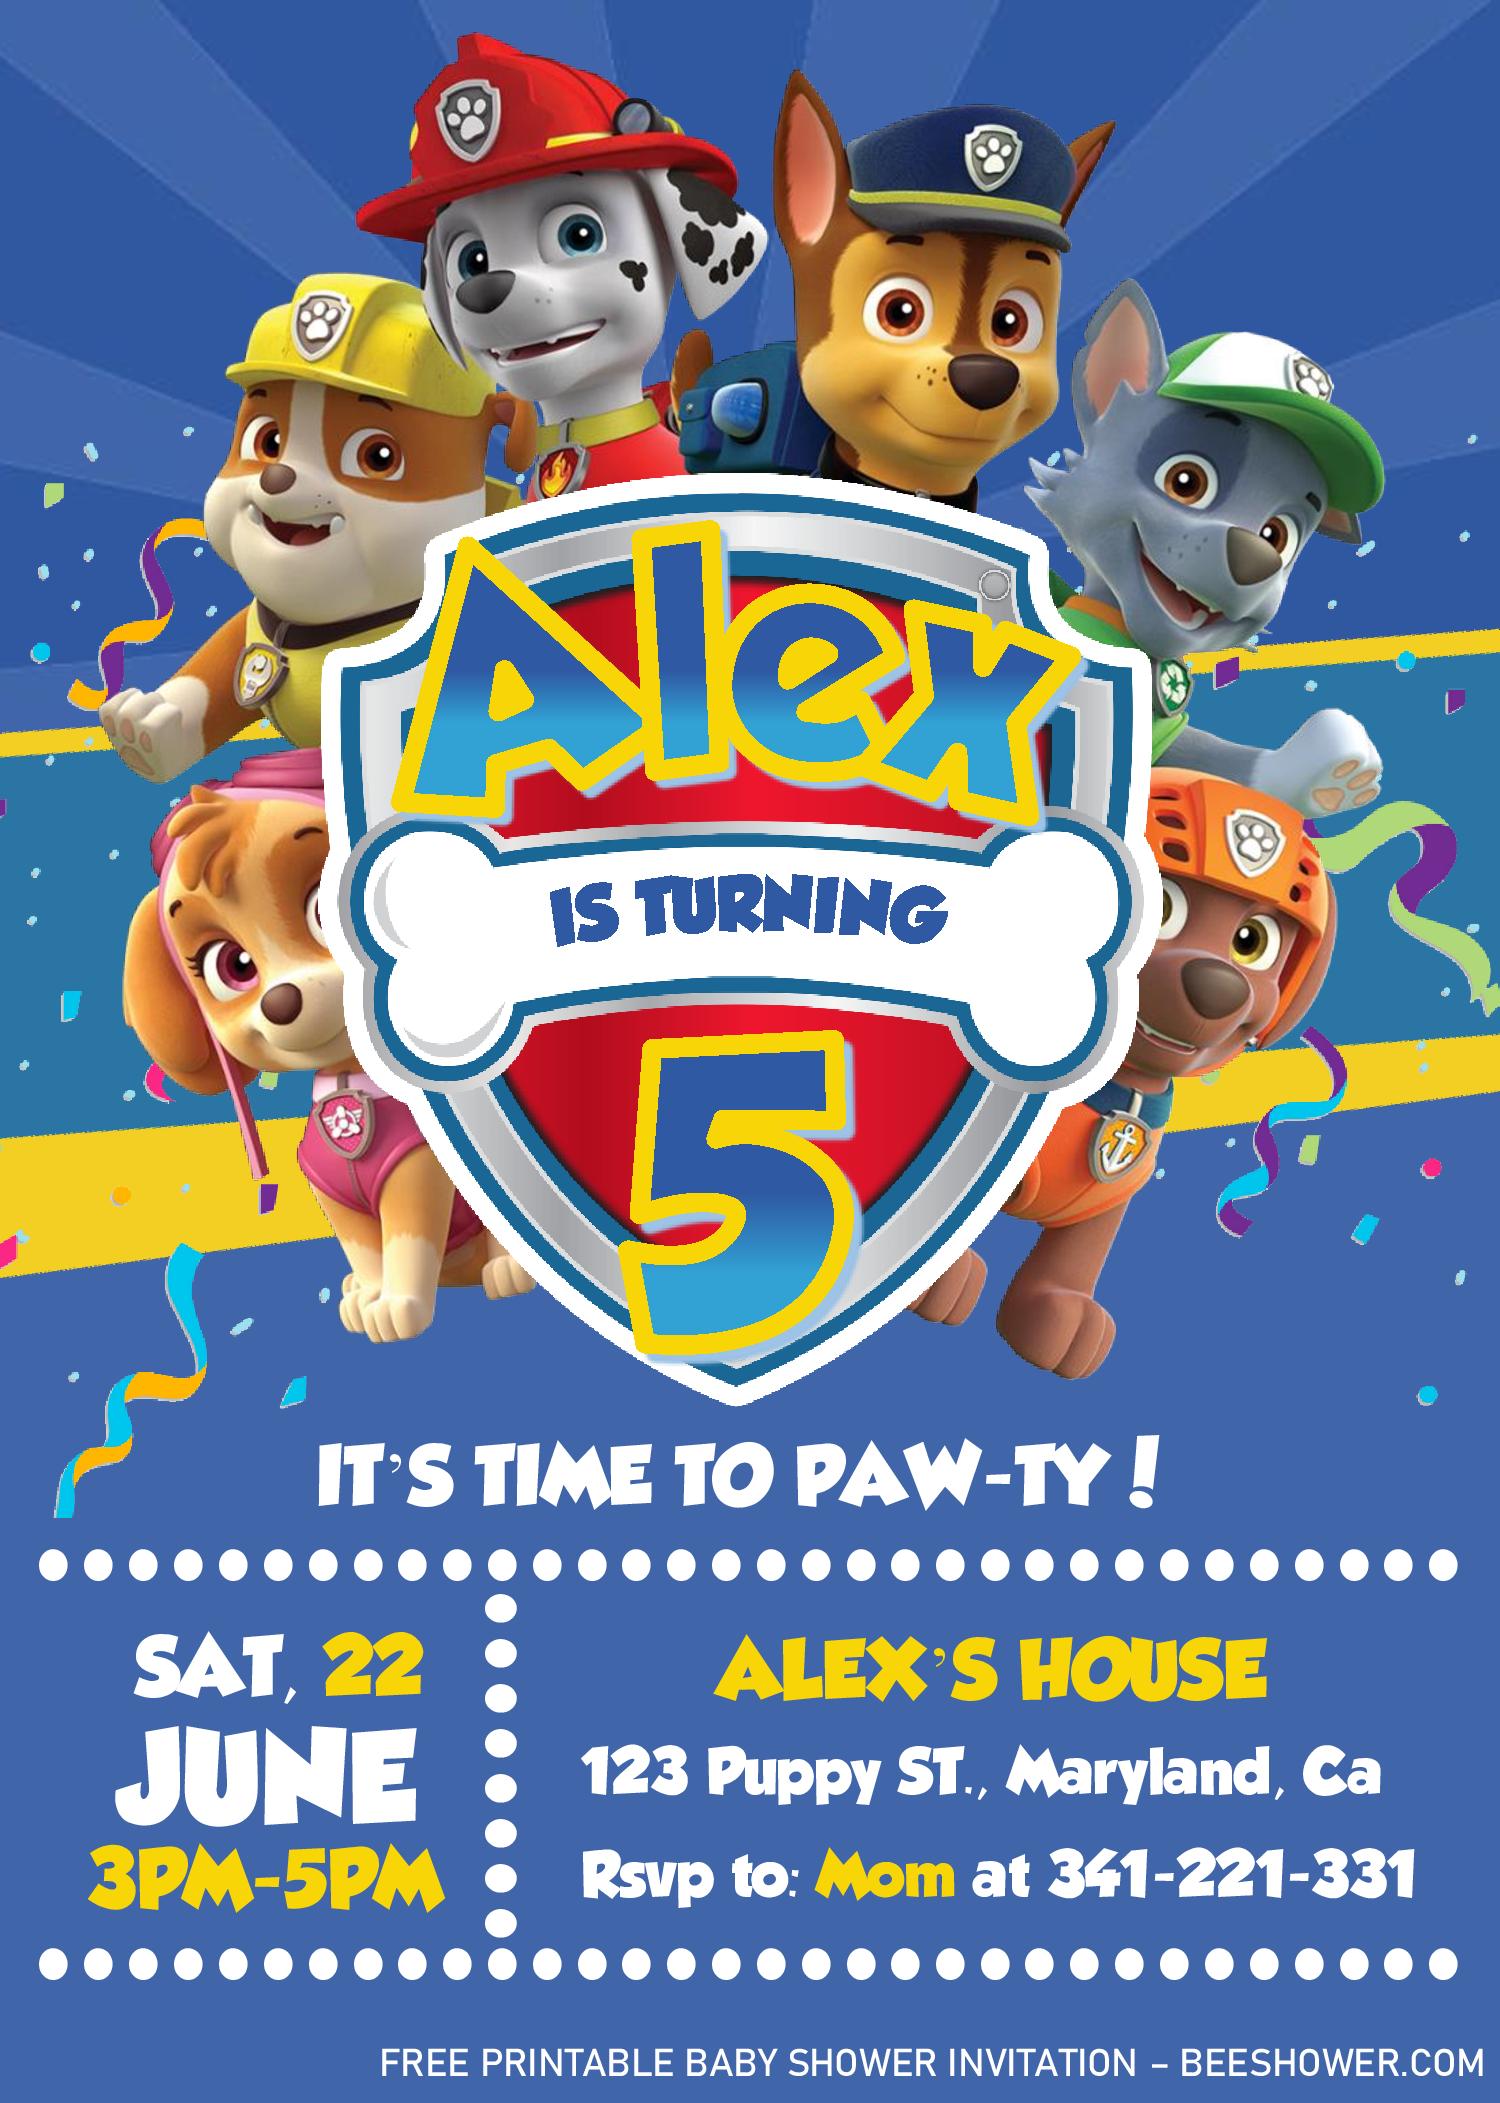 Paw Patrol Invitation Templates Editable With MS Word Beeshower